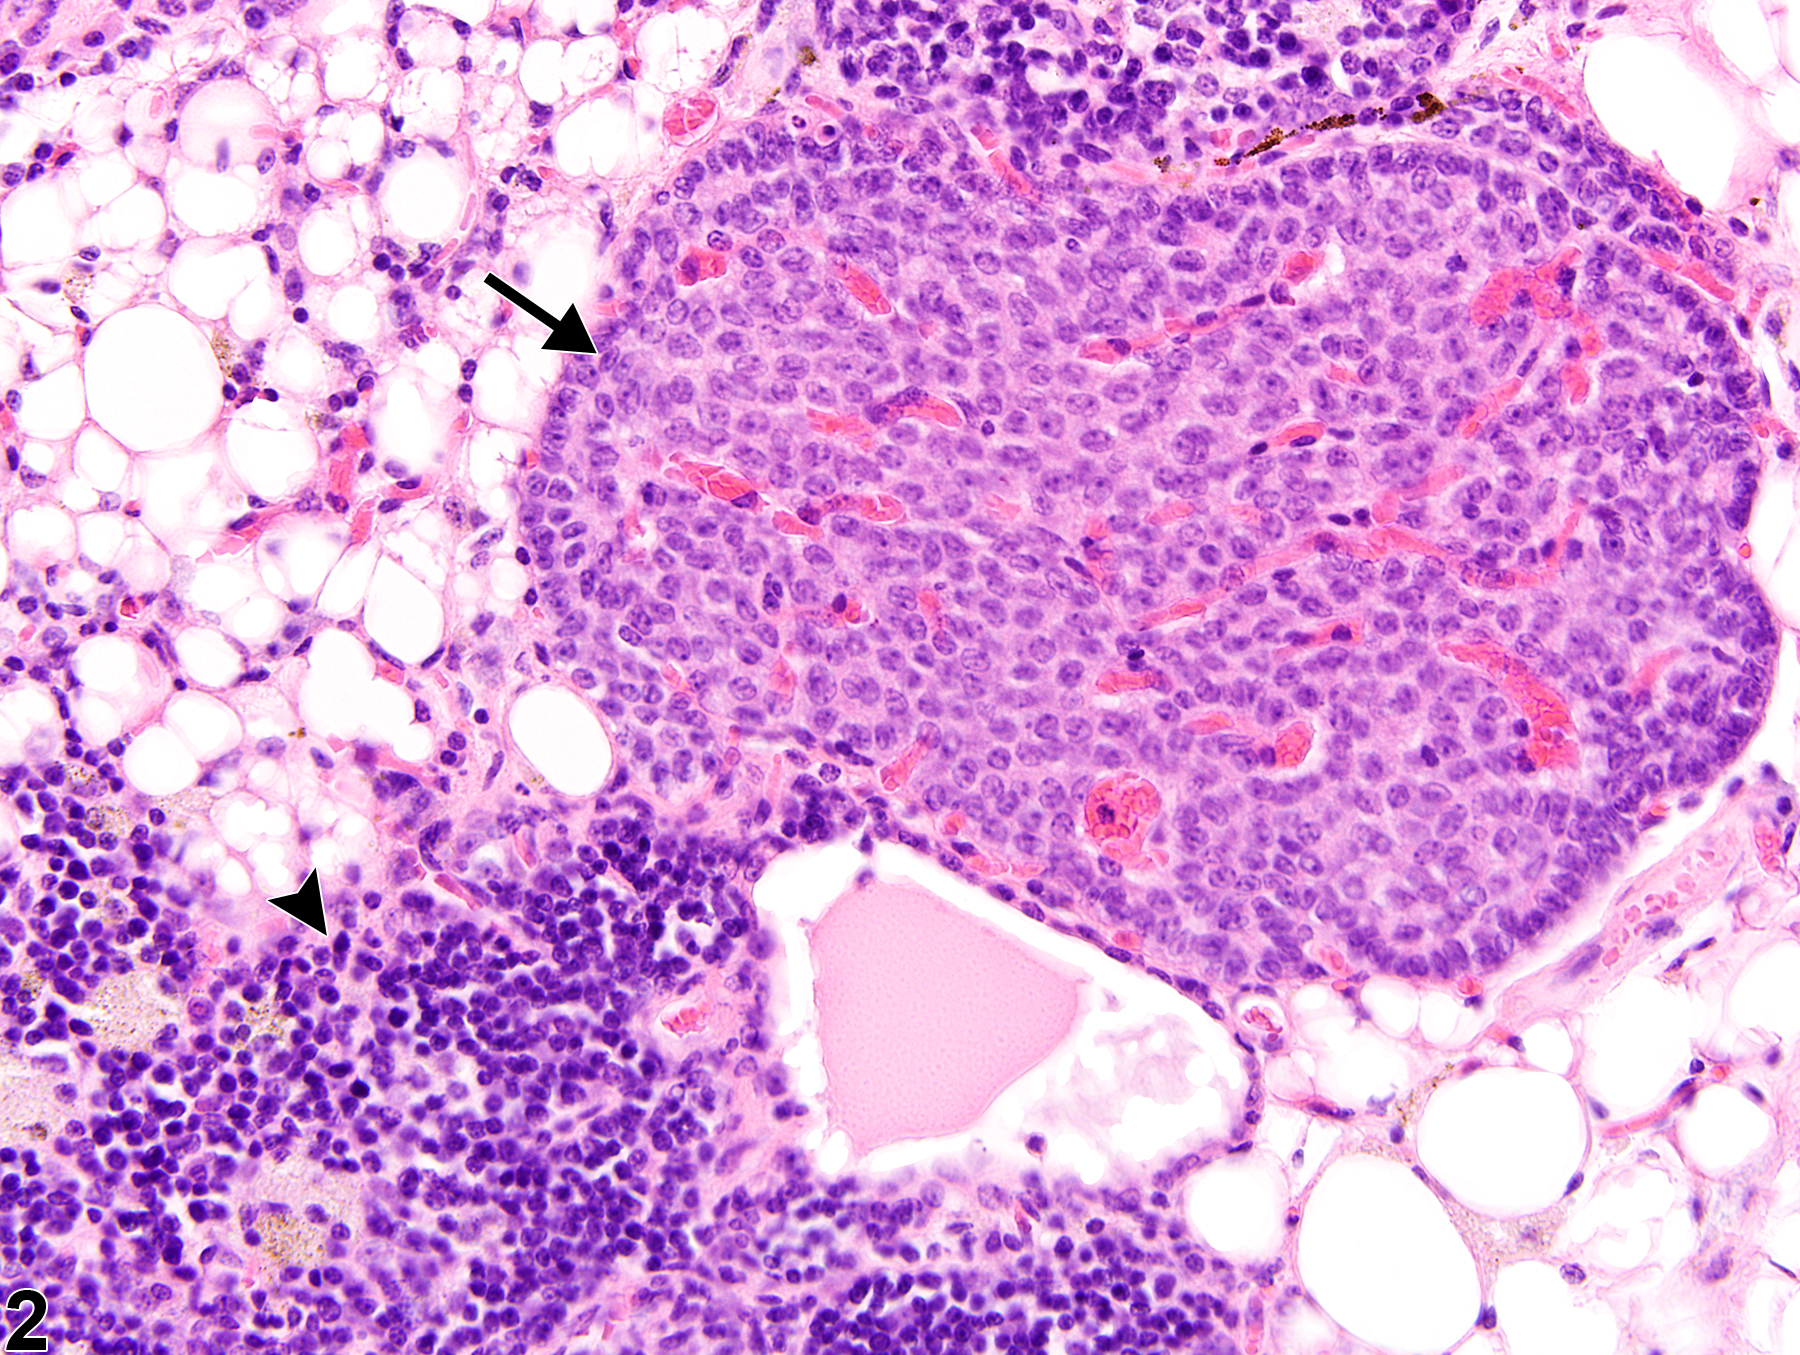 Image of ectopic tissue in the thymus from a female F344/N rat in a chronic study